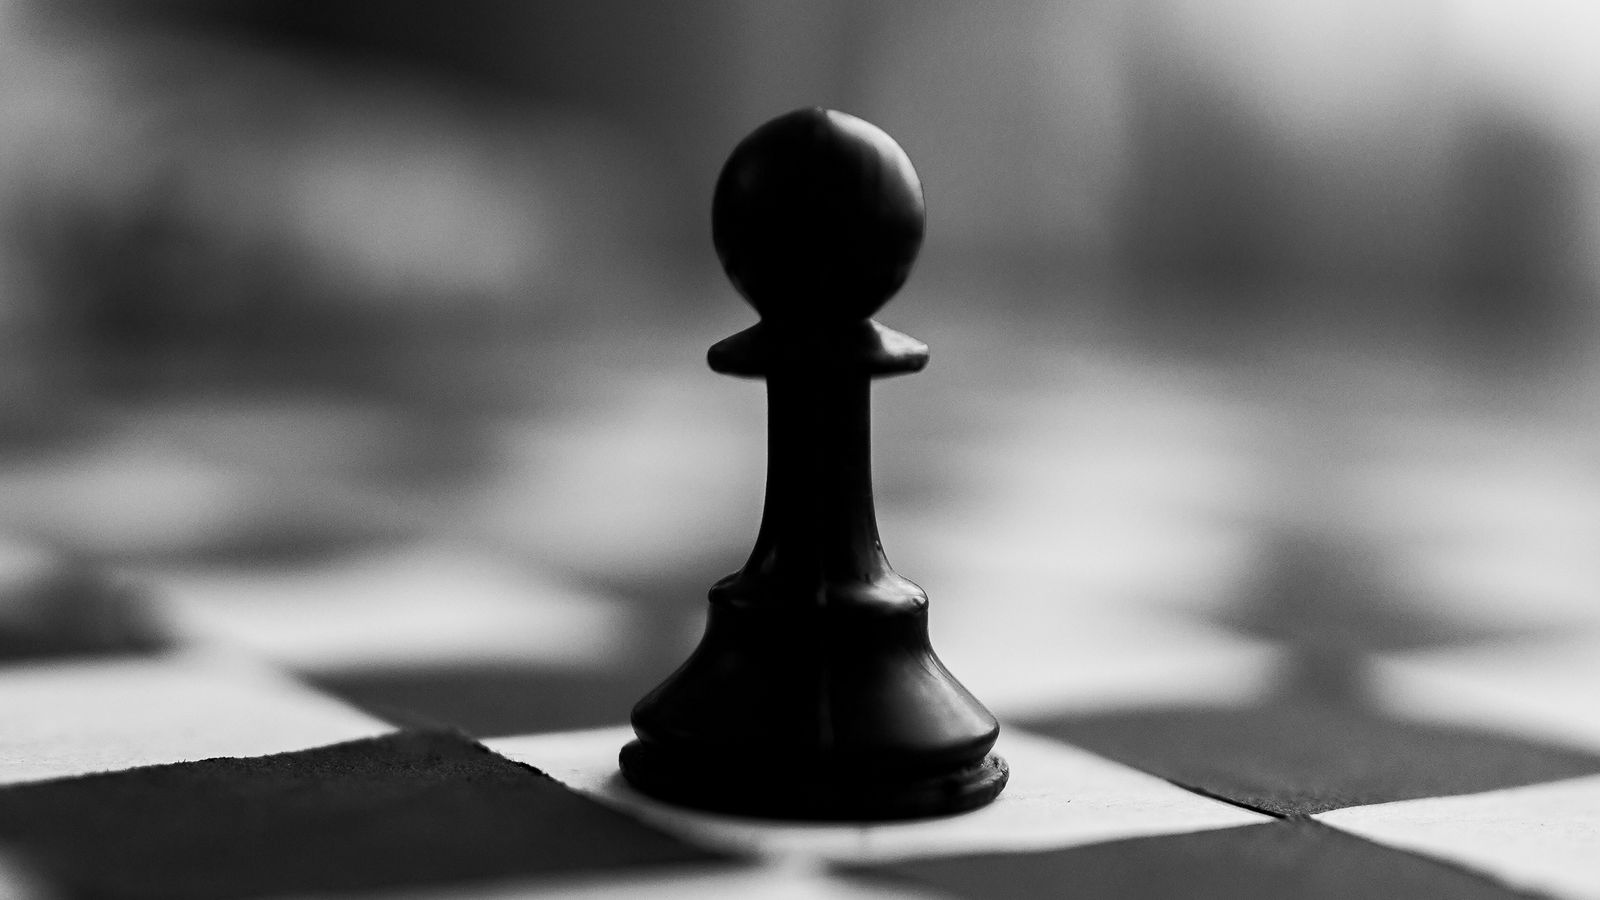 Download wallpaper 1600x900 chess, figure, pawn, game, games, gaming  widescreen 16:9 hd background